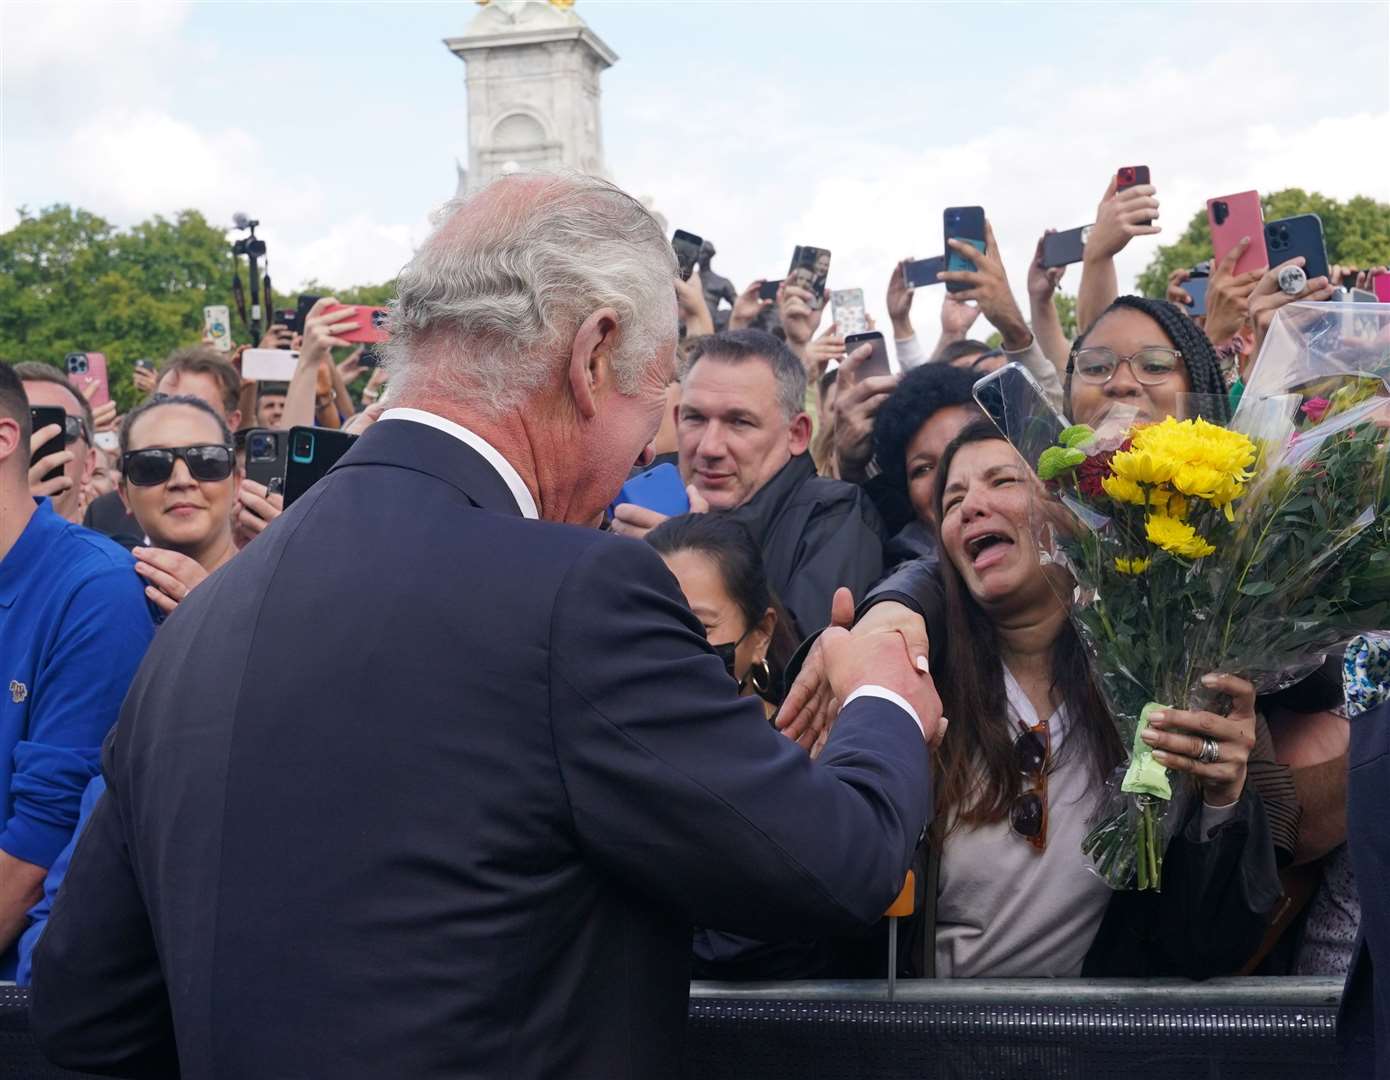 King Charles III is greeted by well-wishers (Yui Mok/PA)